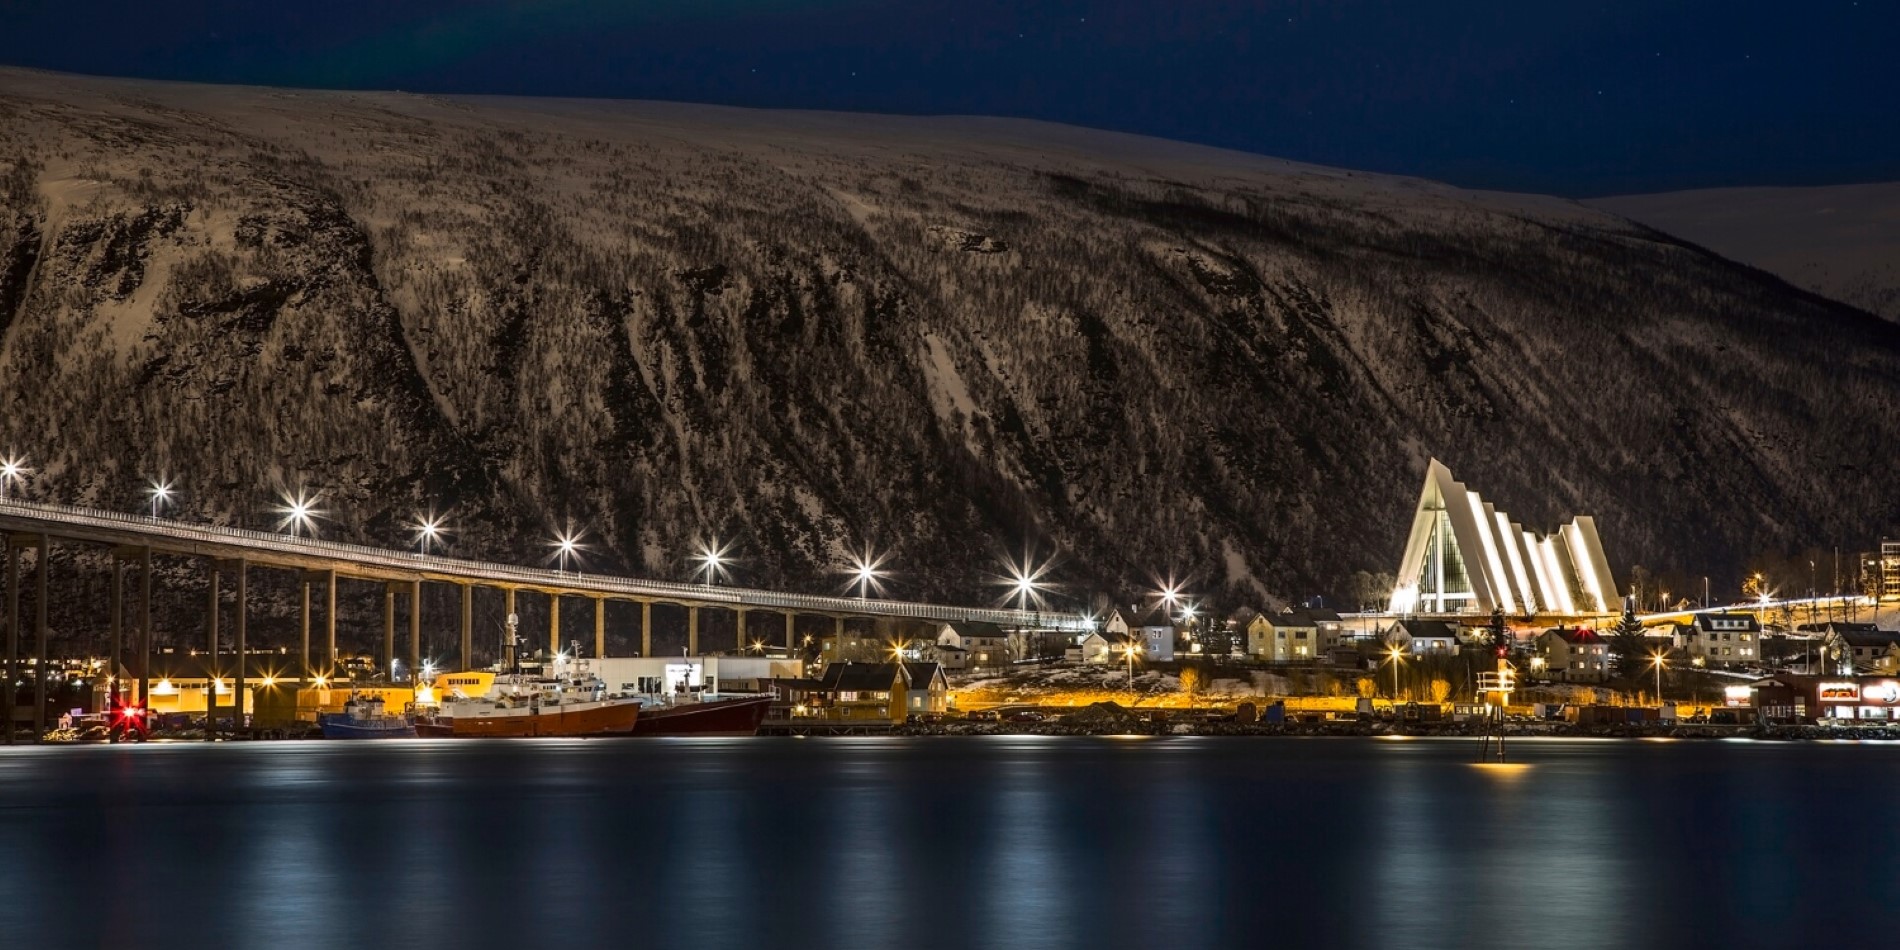 The Arctic Cathedral seen from Tromsøya. Its dark and the bridge and cathedral is lighting up the dark night